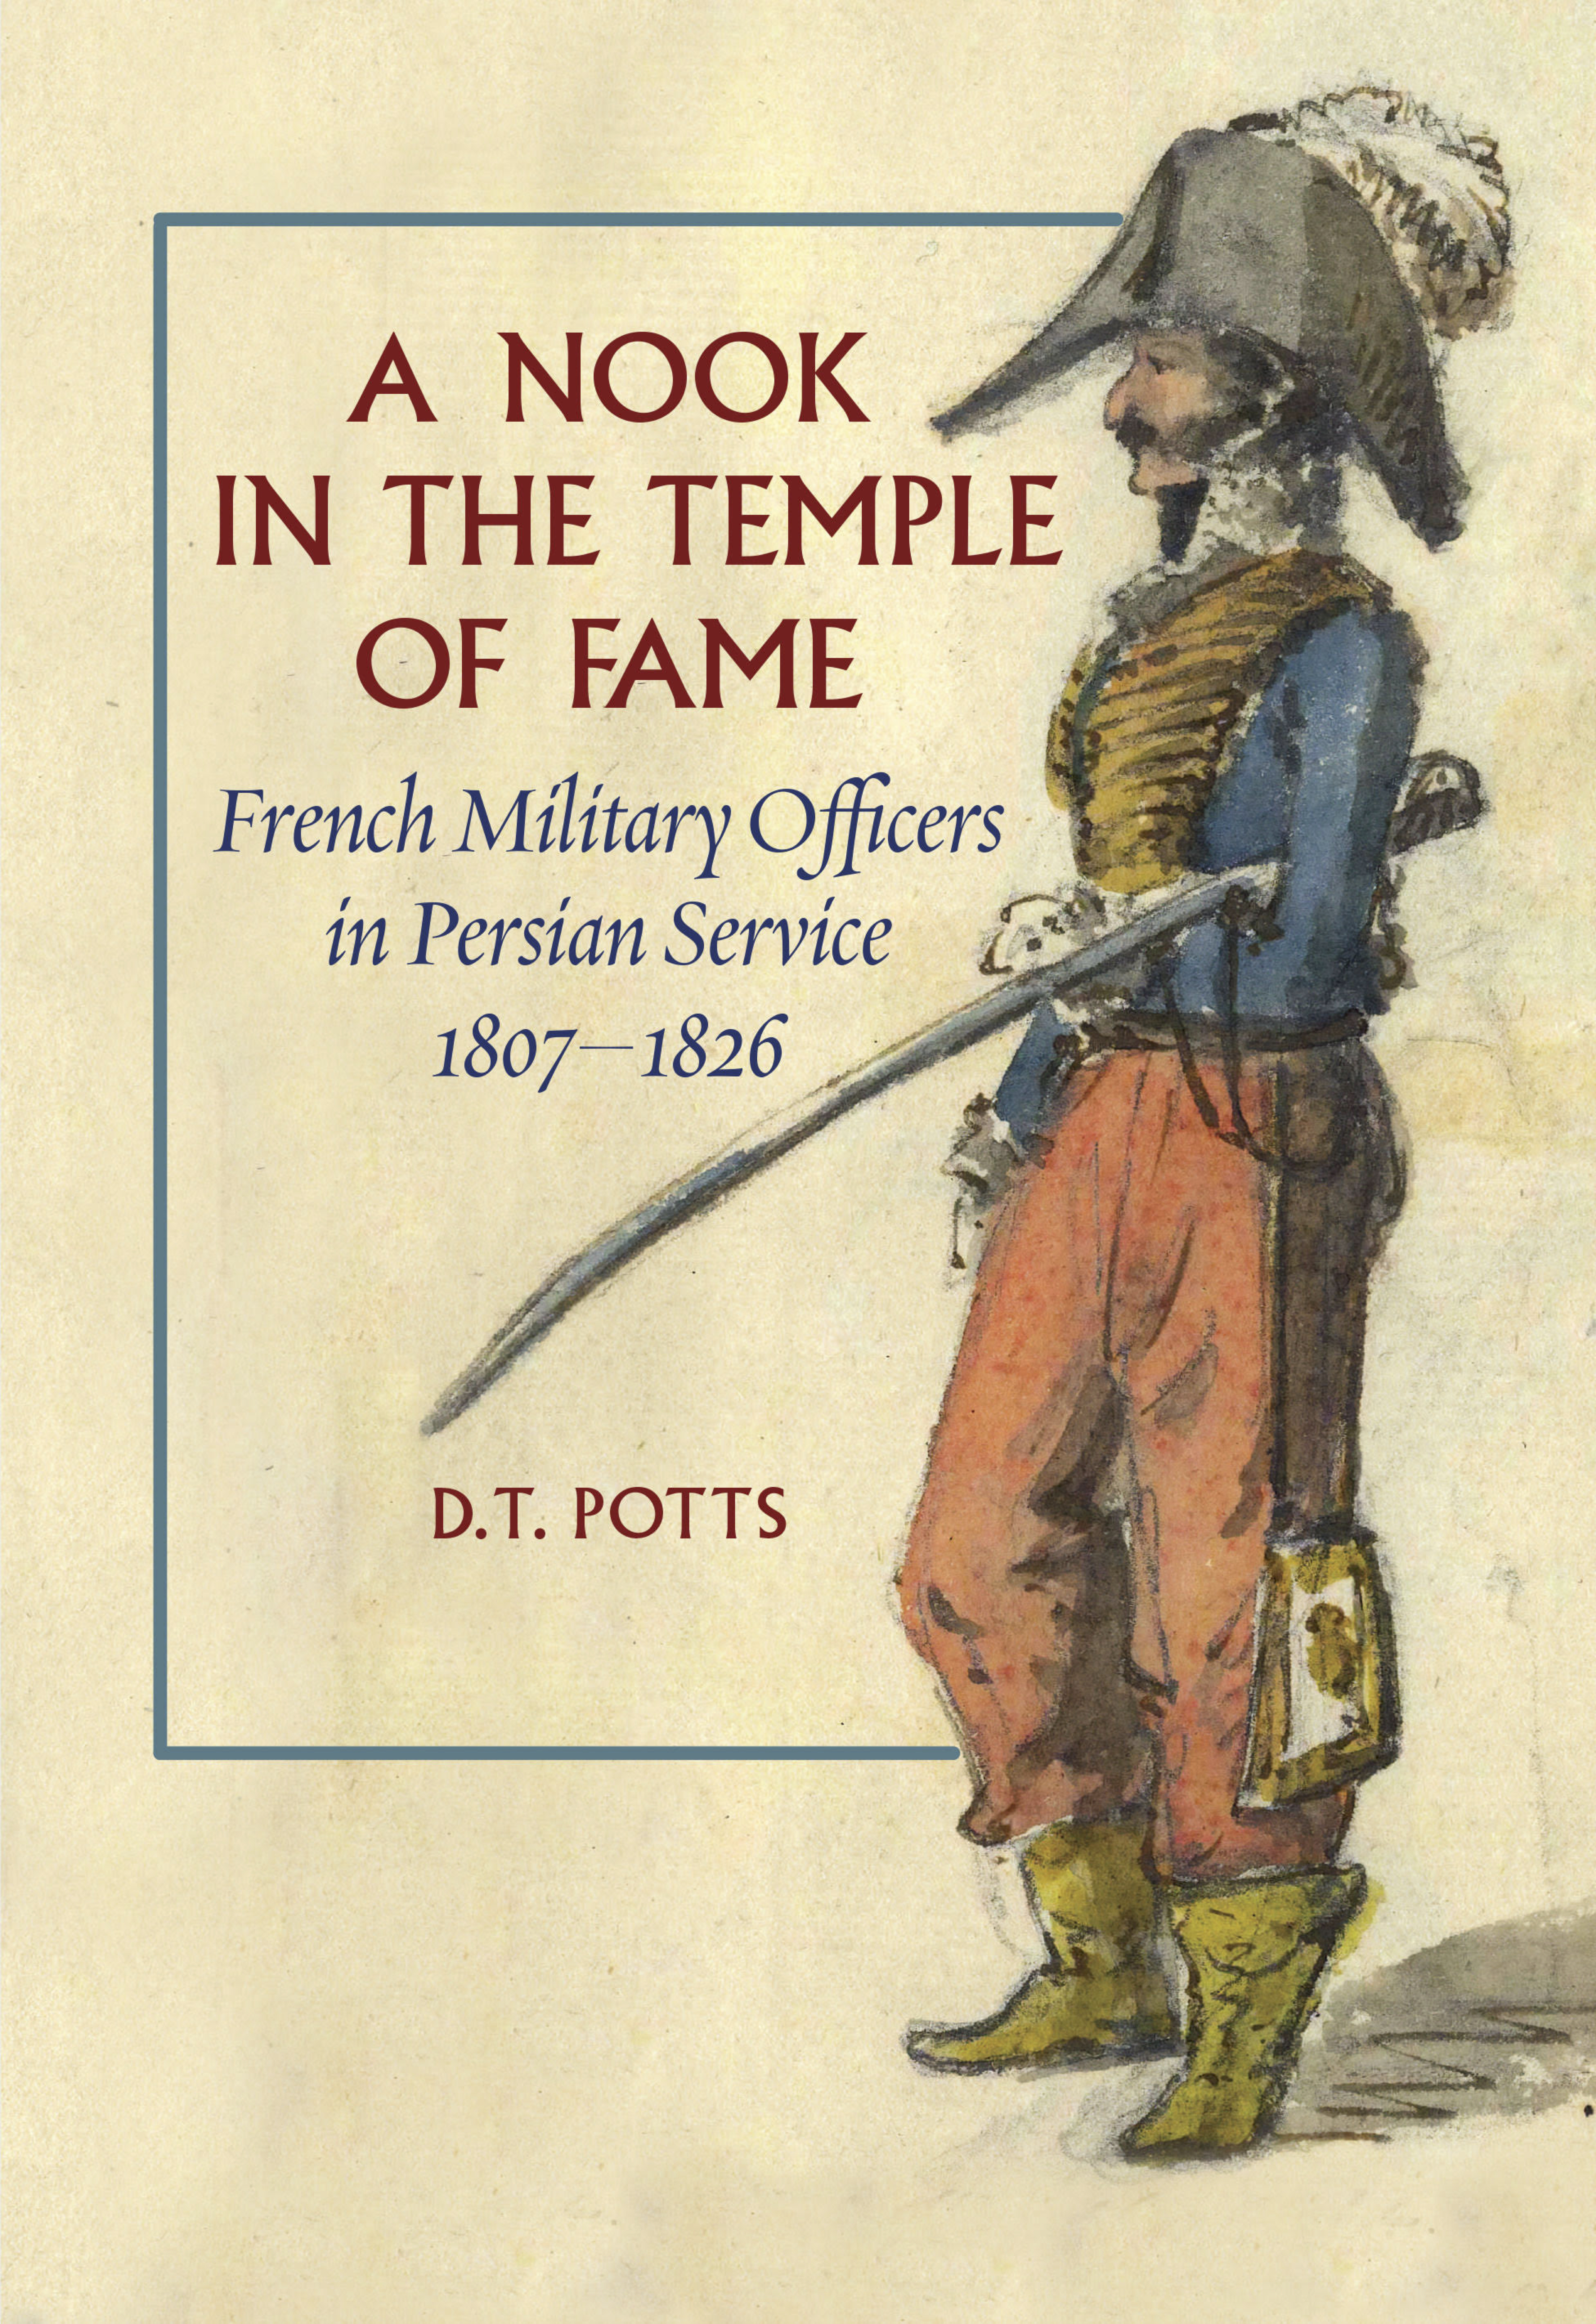 "A Nook in the Temple of Fame" by ISAW Professor Dan Potts